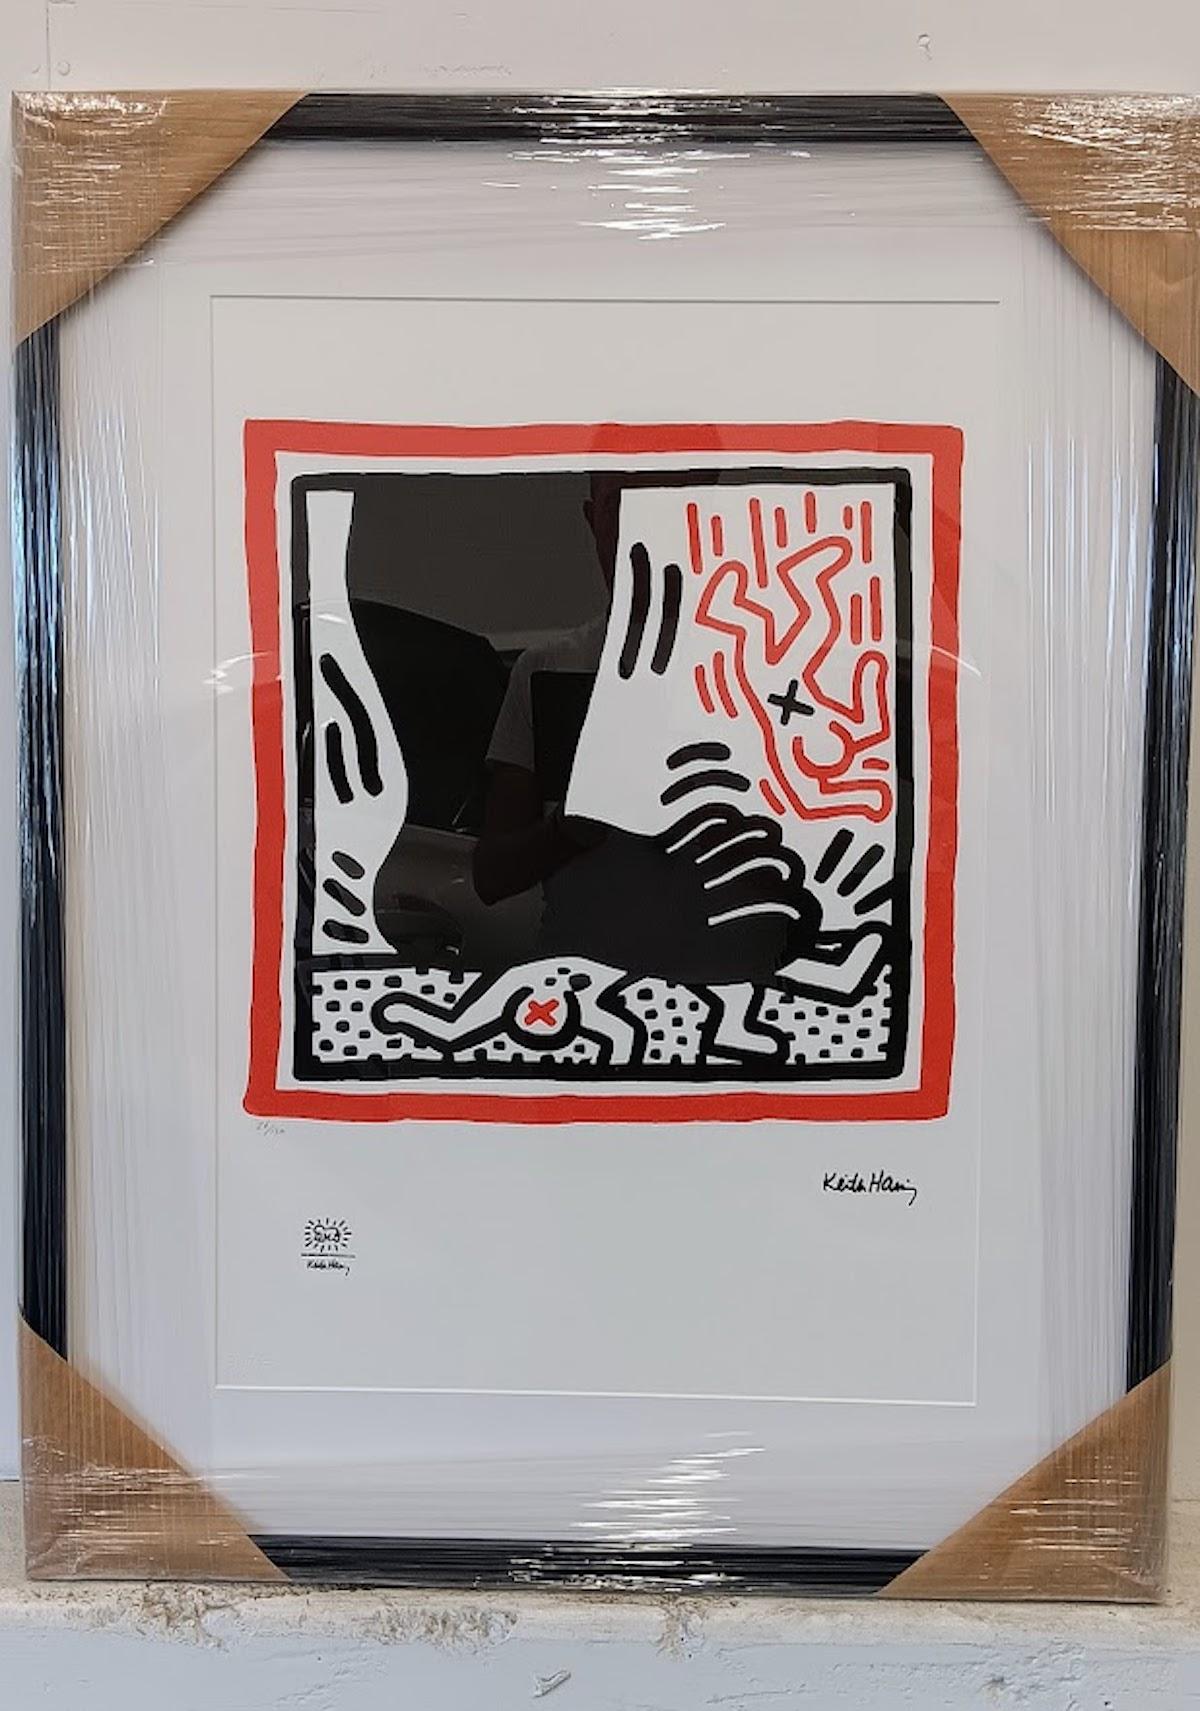 Free South Africa, Keith Haring Foundation, Limited edition of /150
Keith Haring's 1985 Free South Africa series captures the struggle of the black majority against the oppressive white minority in Apartheid South Africa, symbolized by a rope around